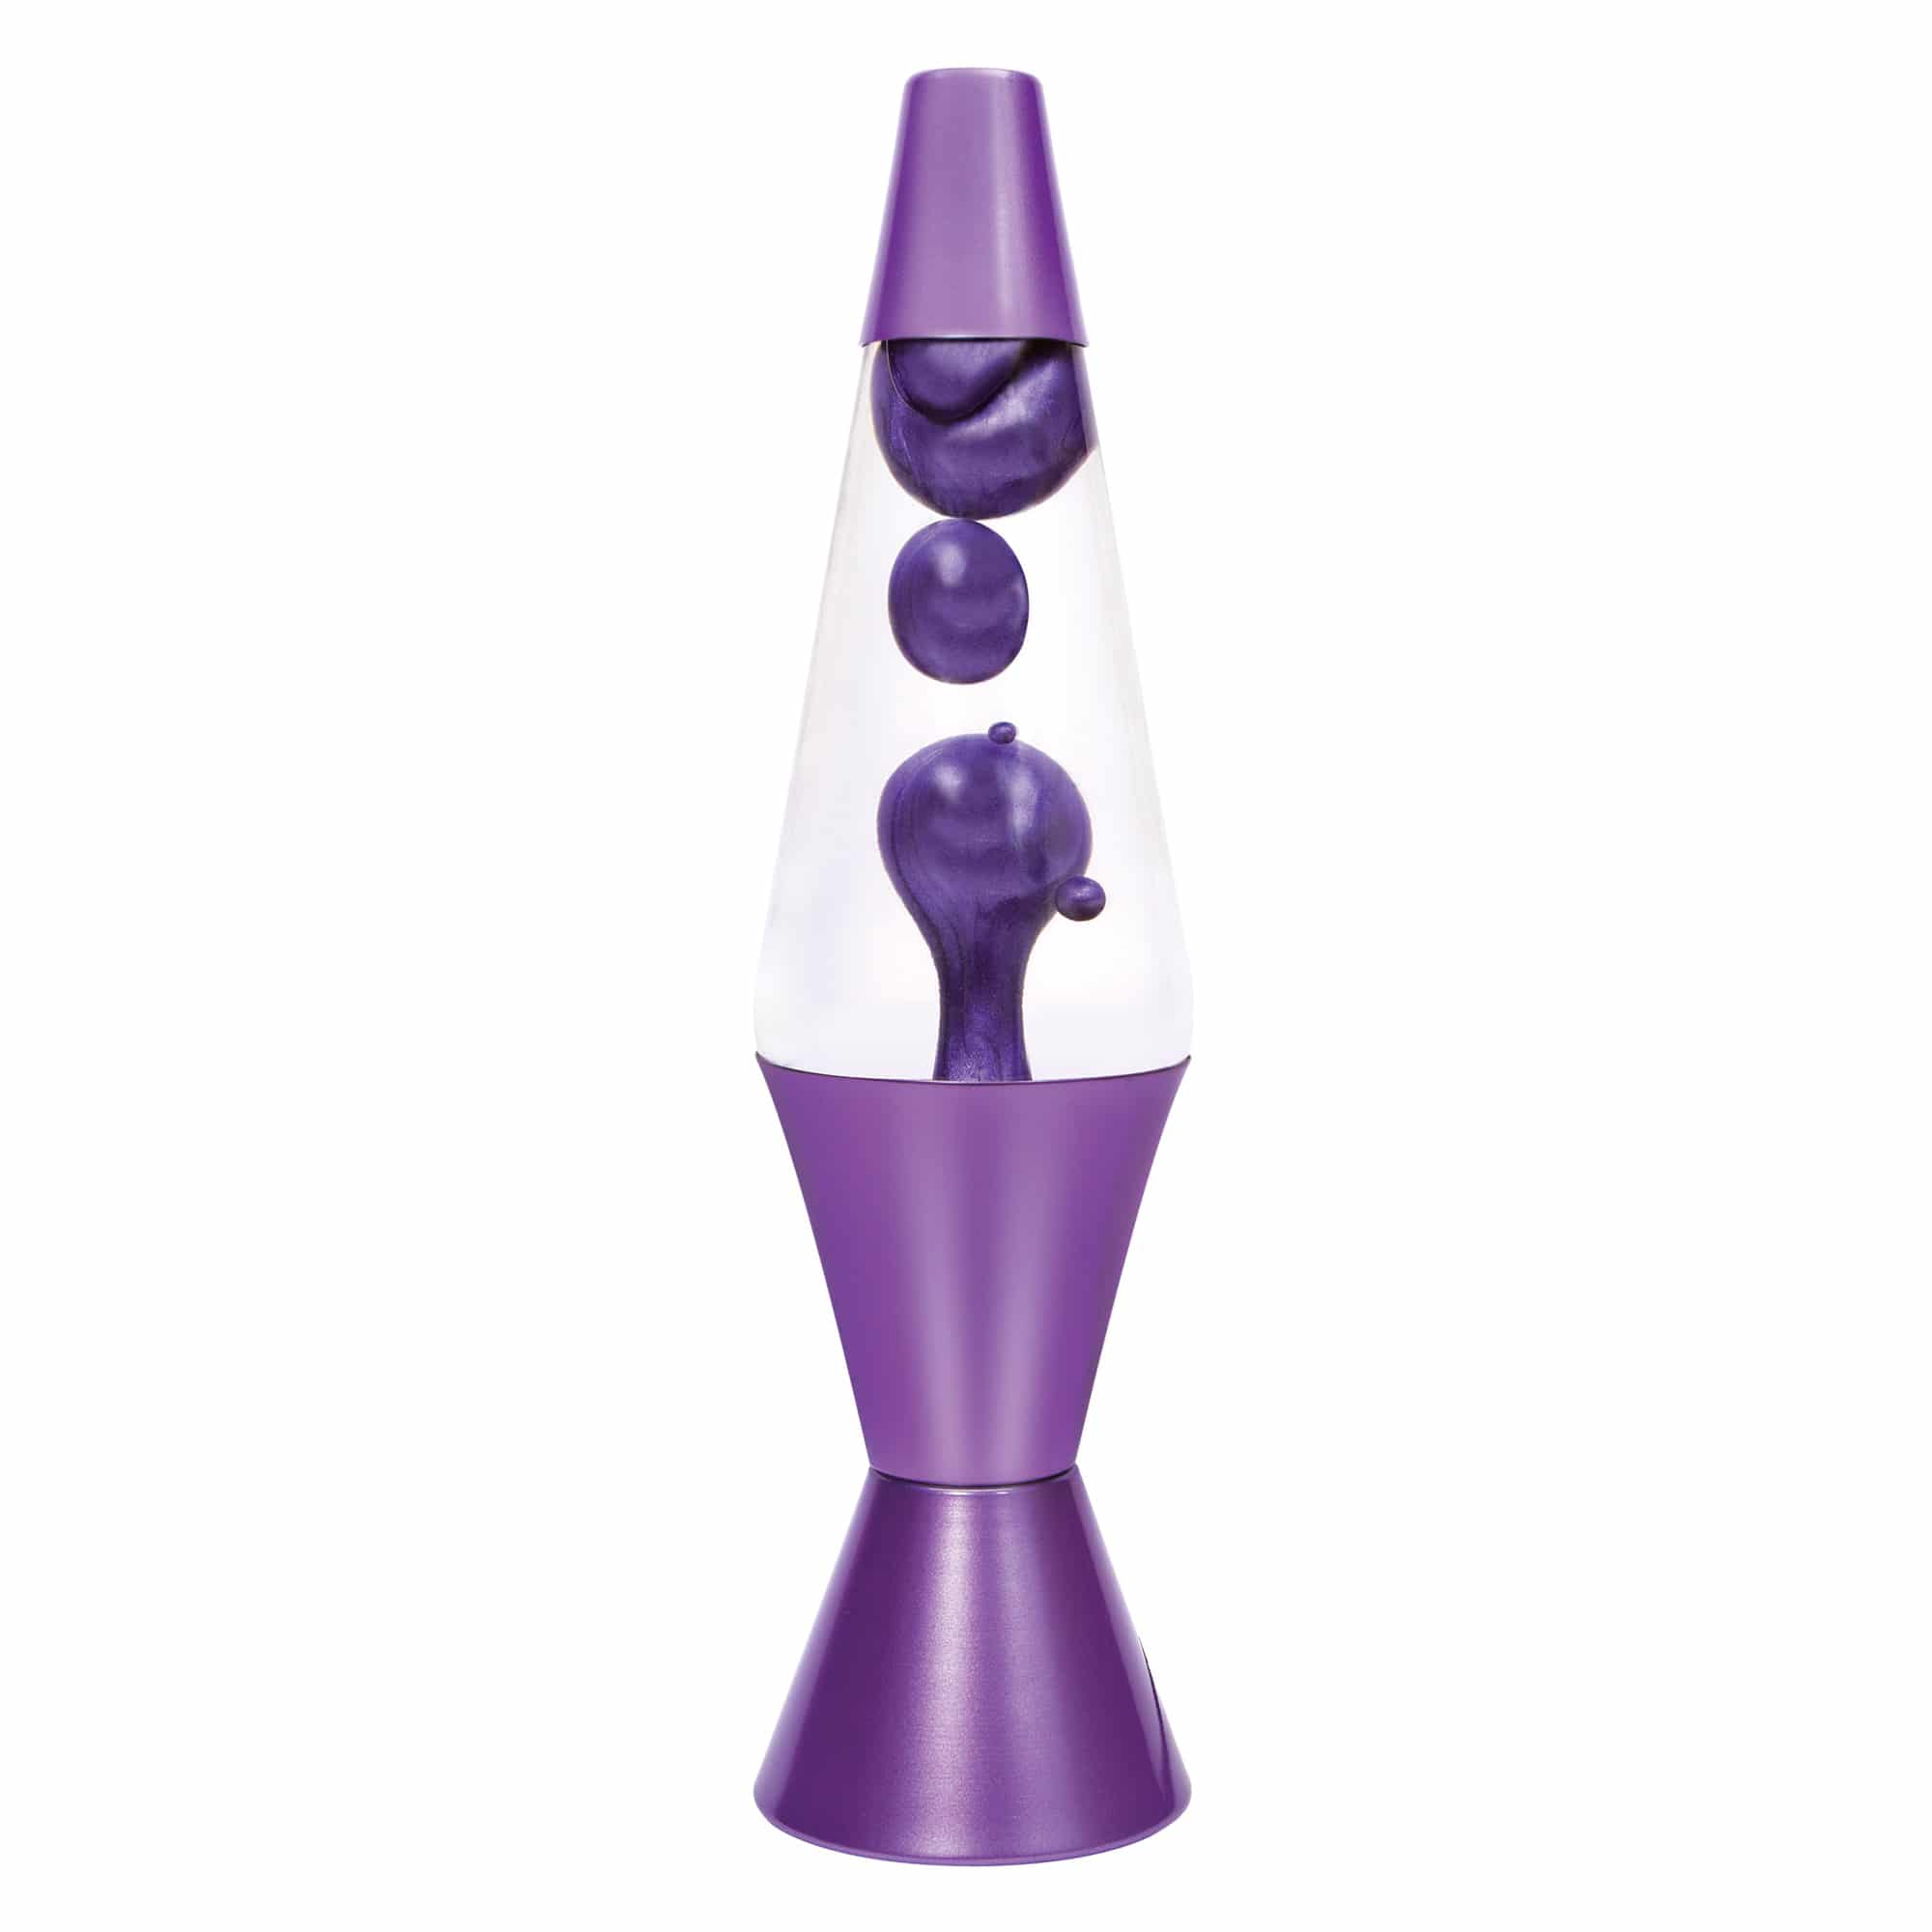 Purple Wax Lava 10 Unique Lava Lamps Ideas and Complete Guide Before Buying - 10